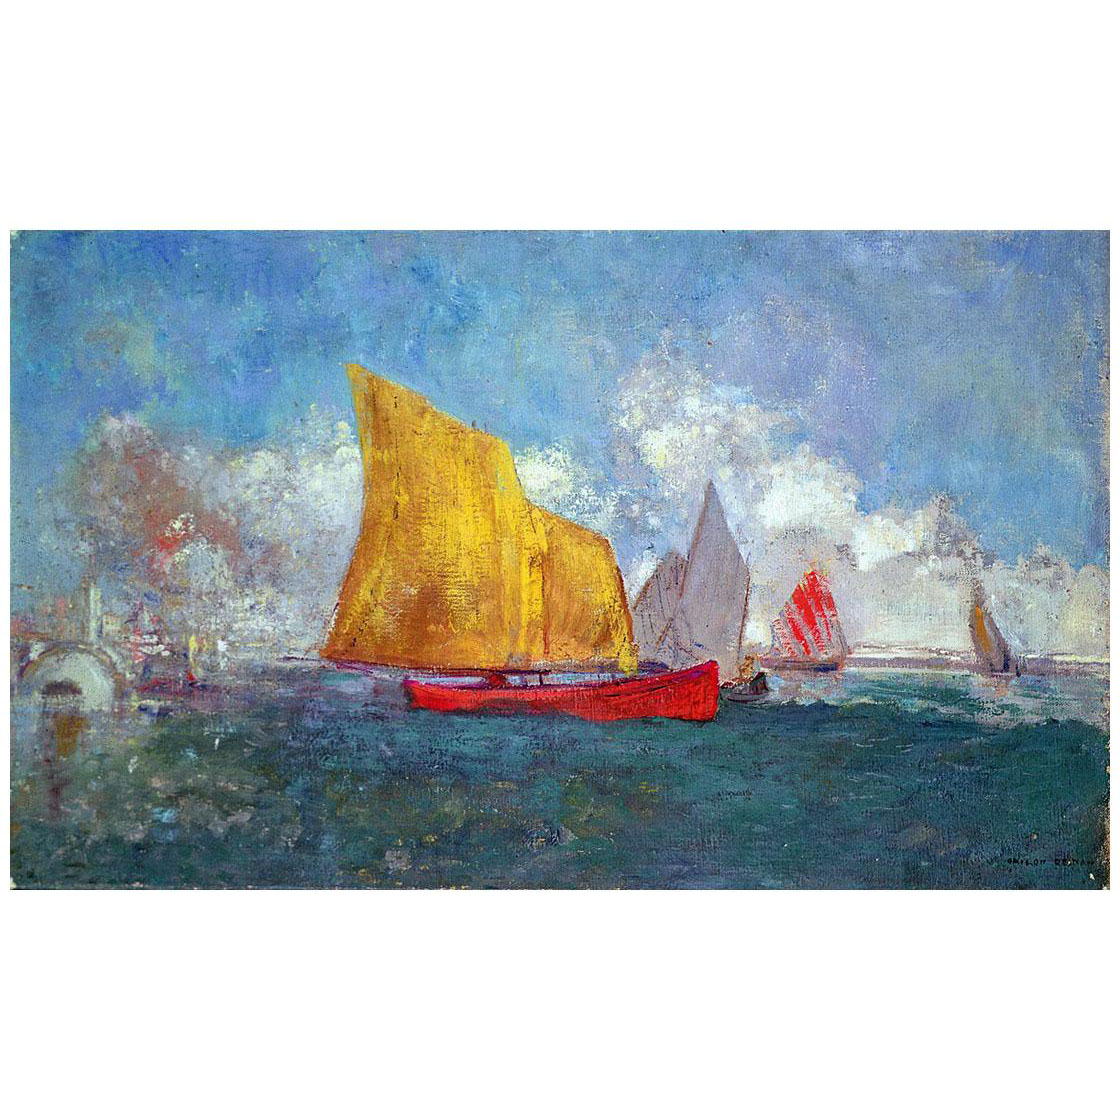 Odilon Redon. Yacht in a Bay. 1908-1910. Private collection